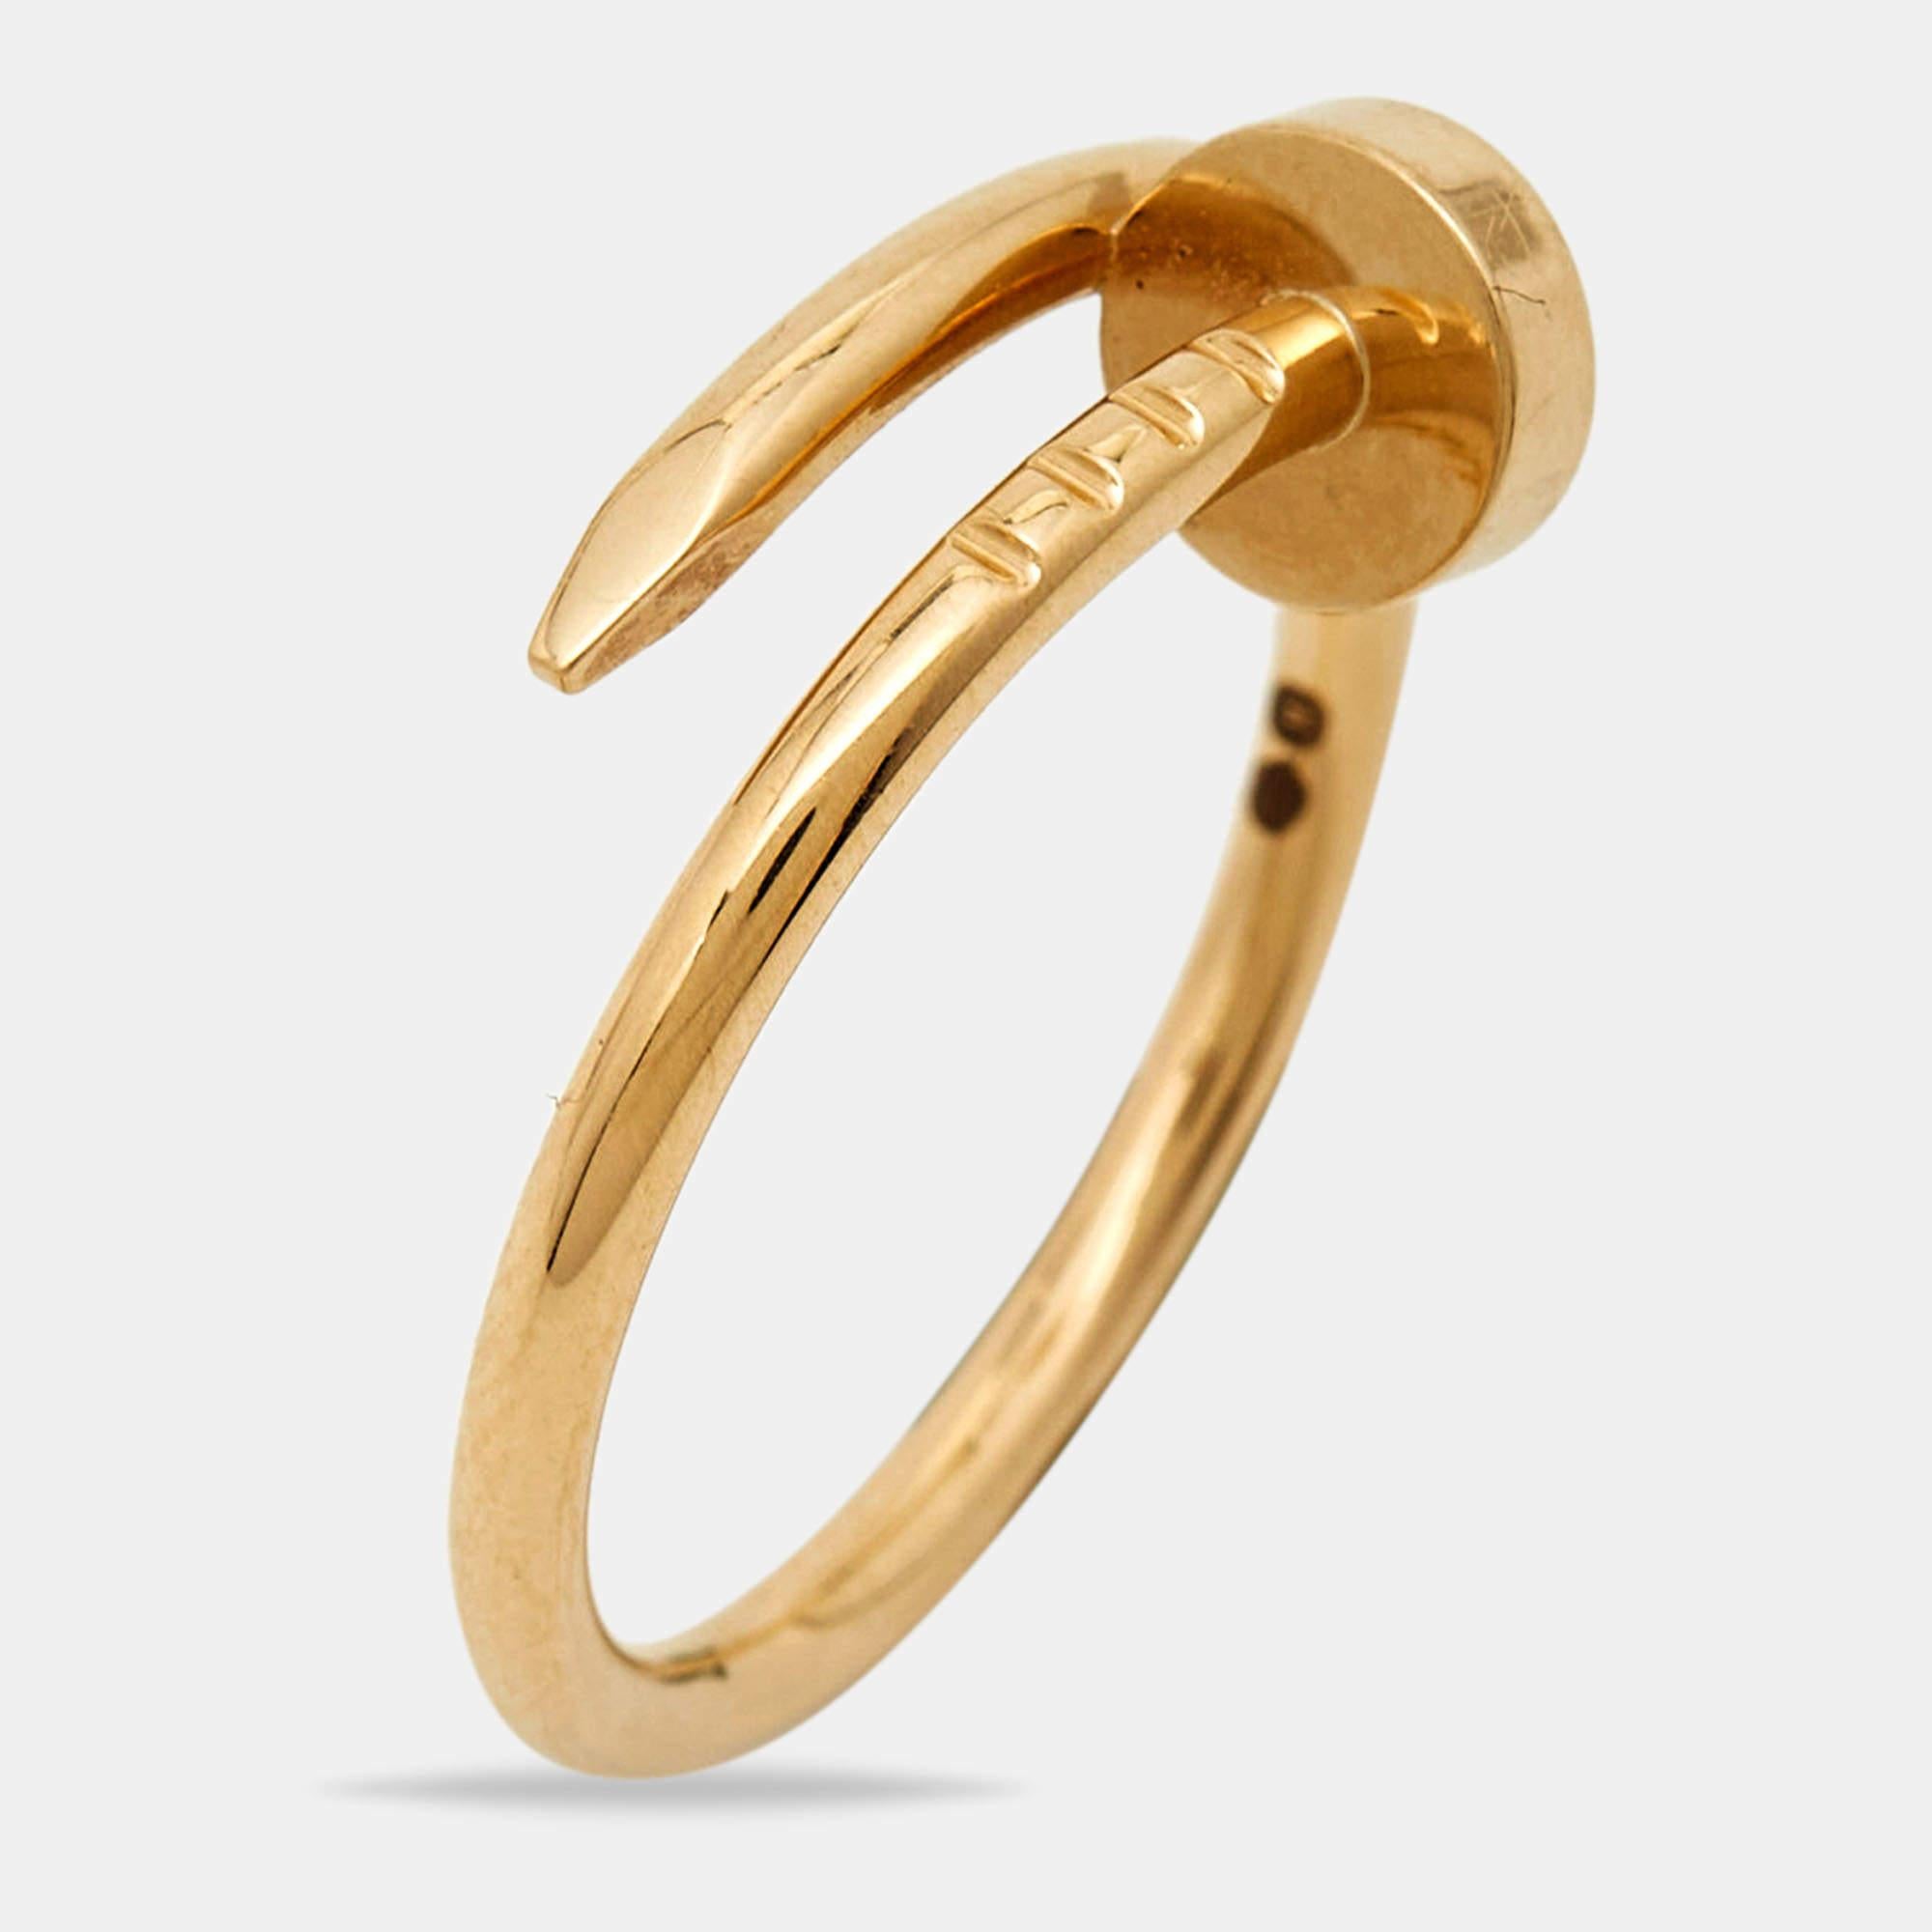 The Cartier Juste Un Clou ring is an iconic and luxurious piece of jewelry. Crafted from gleaming 18k yellow gold, its sleek and minimalist design captures the essence of a nail transformed into an elegant and distinctive fashion